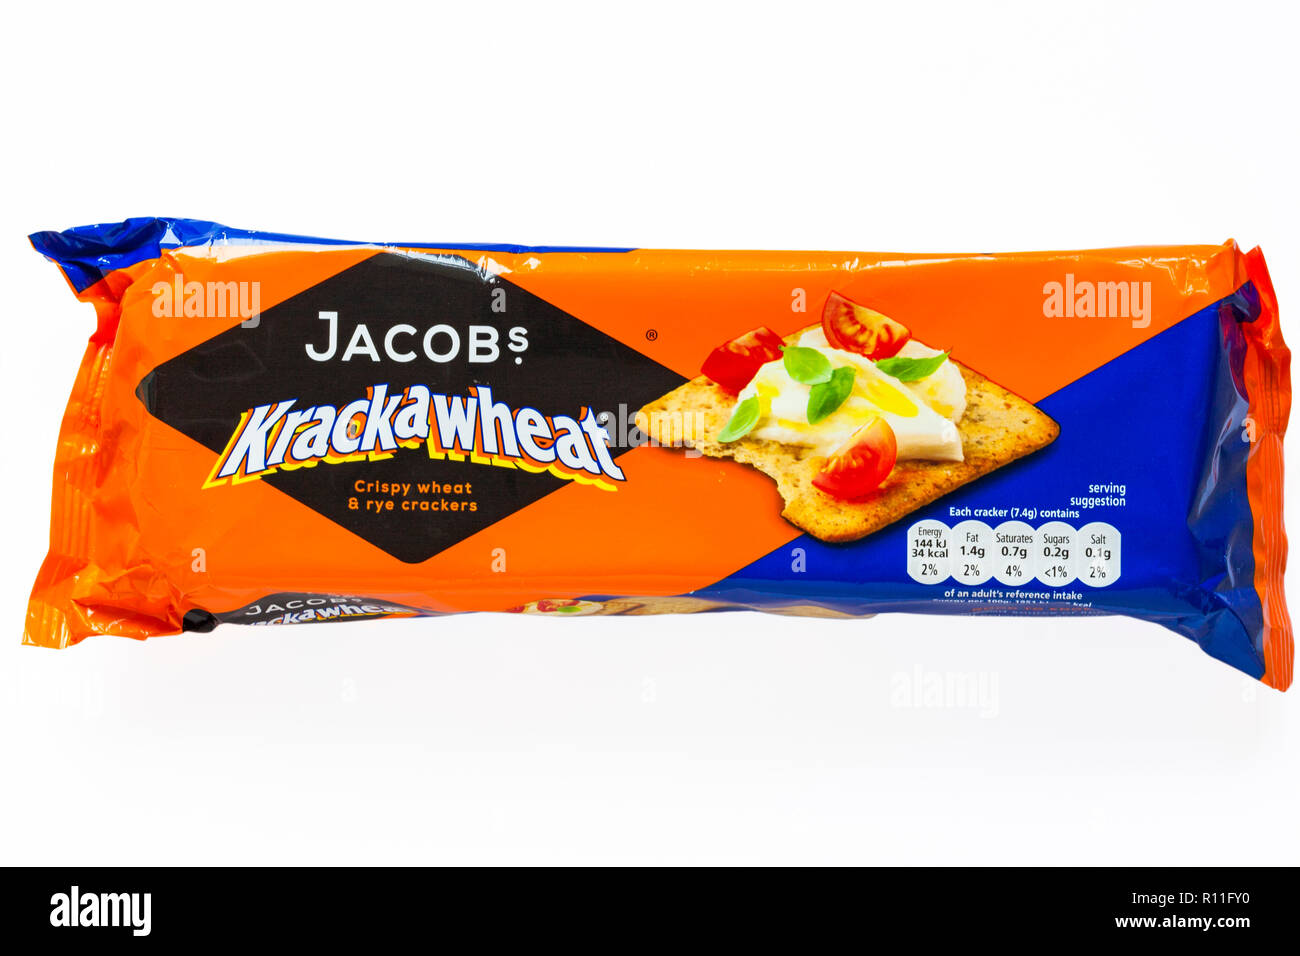 Packet of Jacobs Krackawheat crispy wheat & rye crackers biscuits isolated on white background Stock Photo